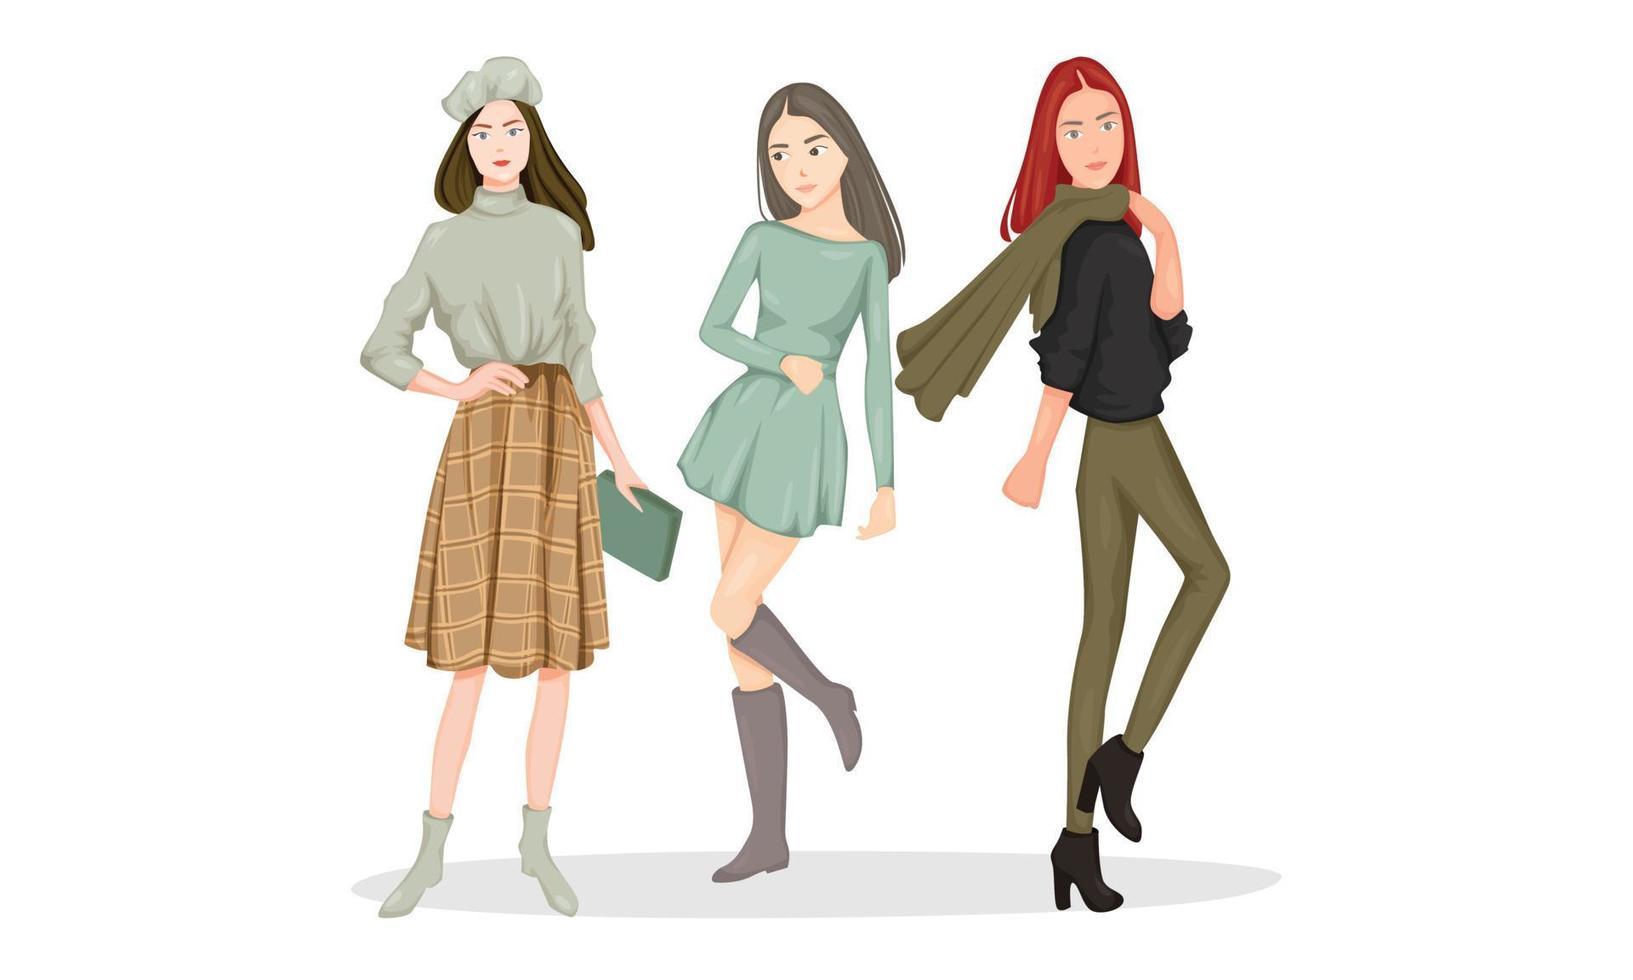 Girls are going to coffee shop wear casual outfit, green mint brown army colour, also using hat and scarf. That girls are student and employer. vector